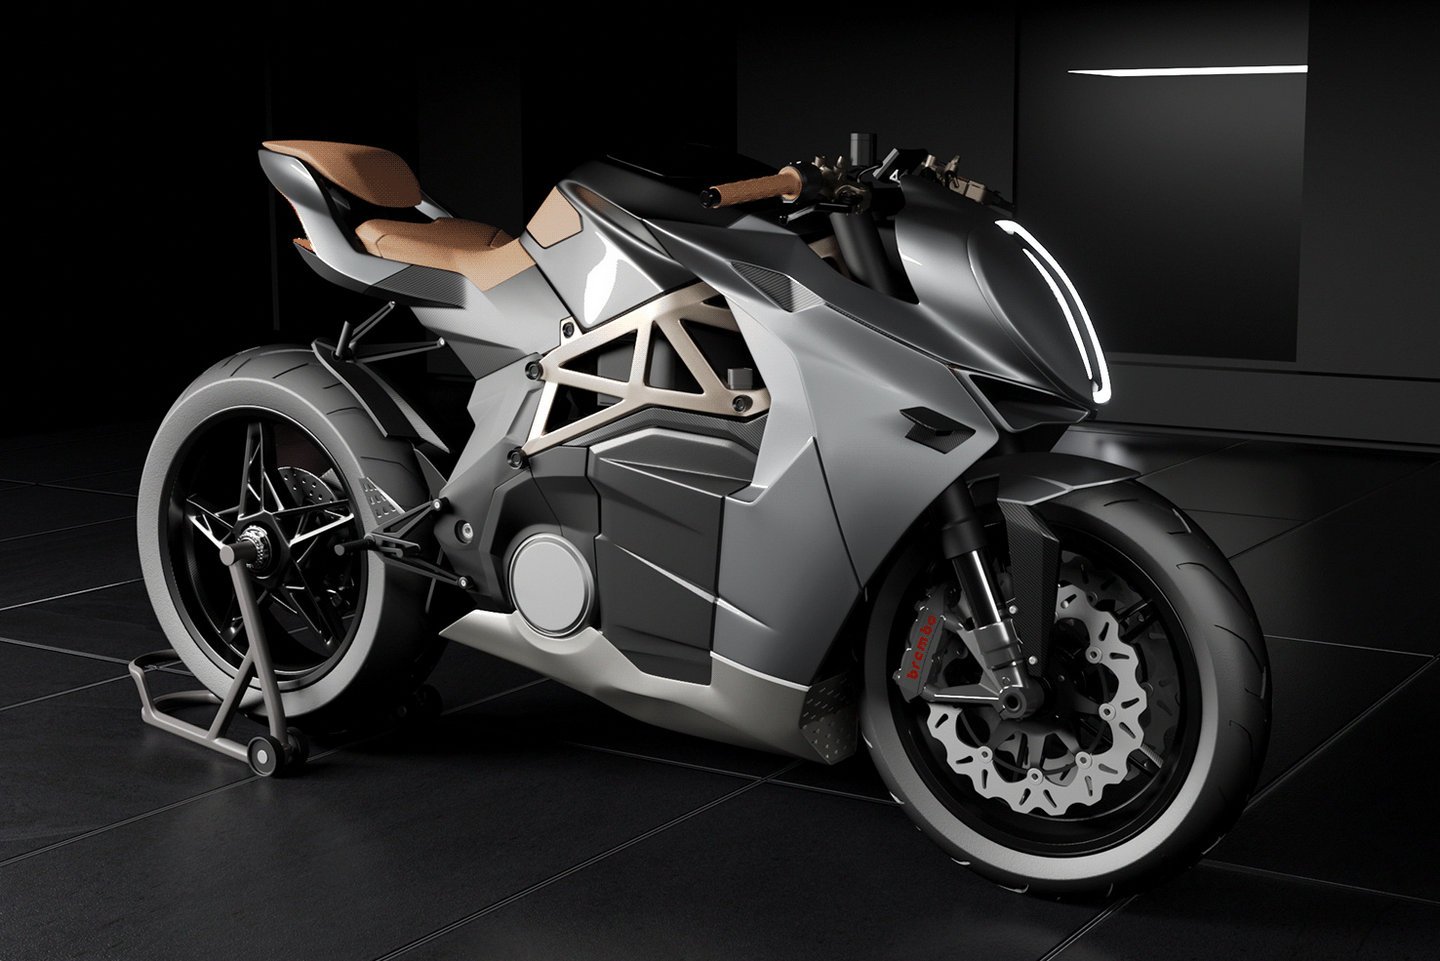 #The Aeolian Hyperbike is an electric beast with an aesthetic that’s a hybrid between Suzuki and Ducati